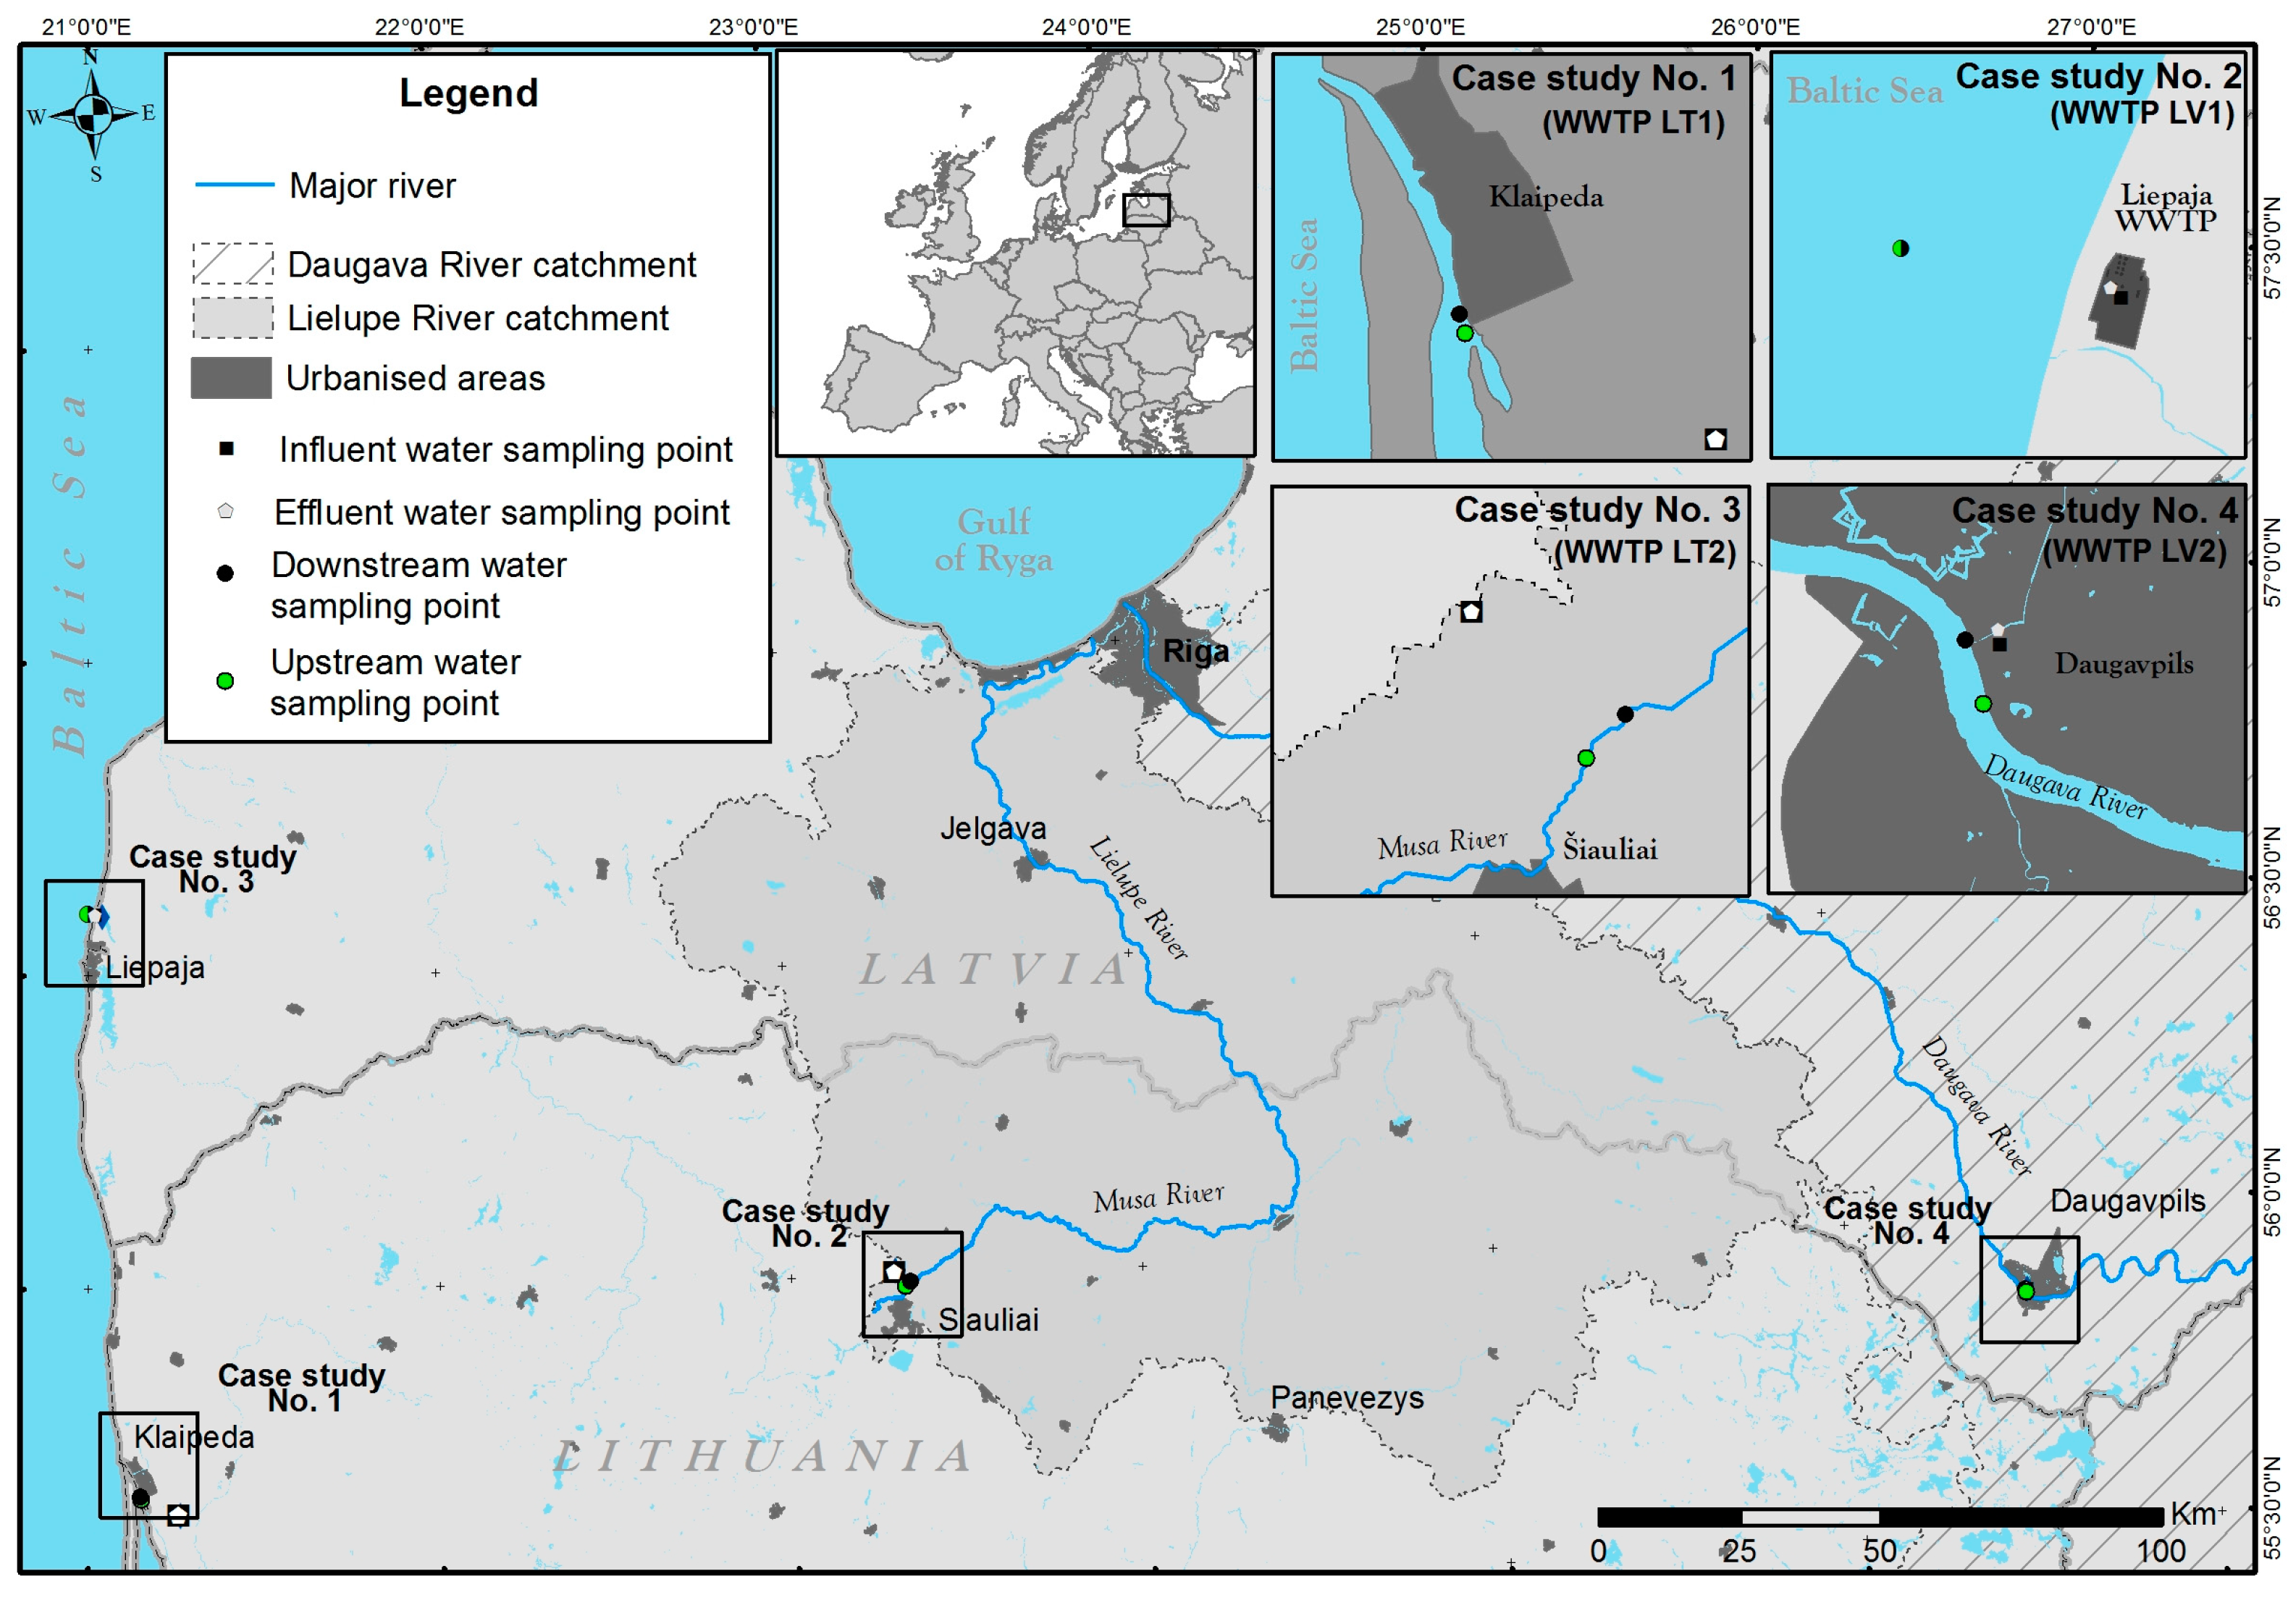 Toxics | Free Full-Text | Assessing the Occurrence and Distribution of  Microplastics in Surface Freshwater and Wastewaters of Latvia and Lithuania